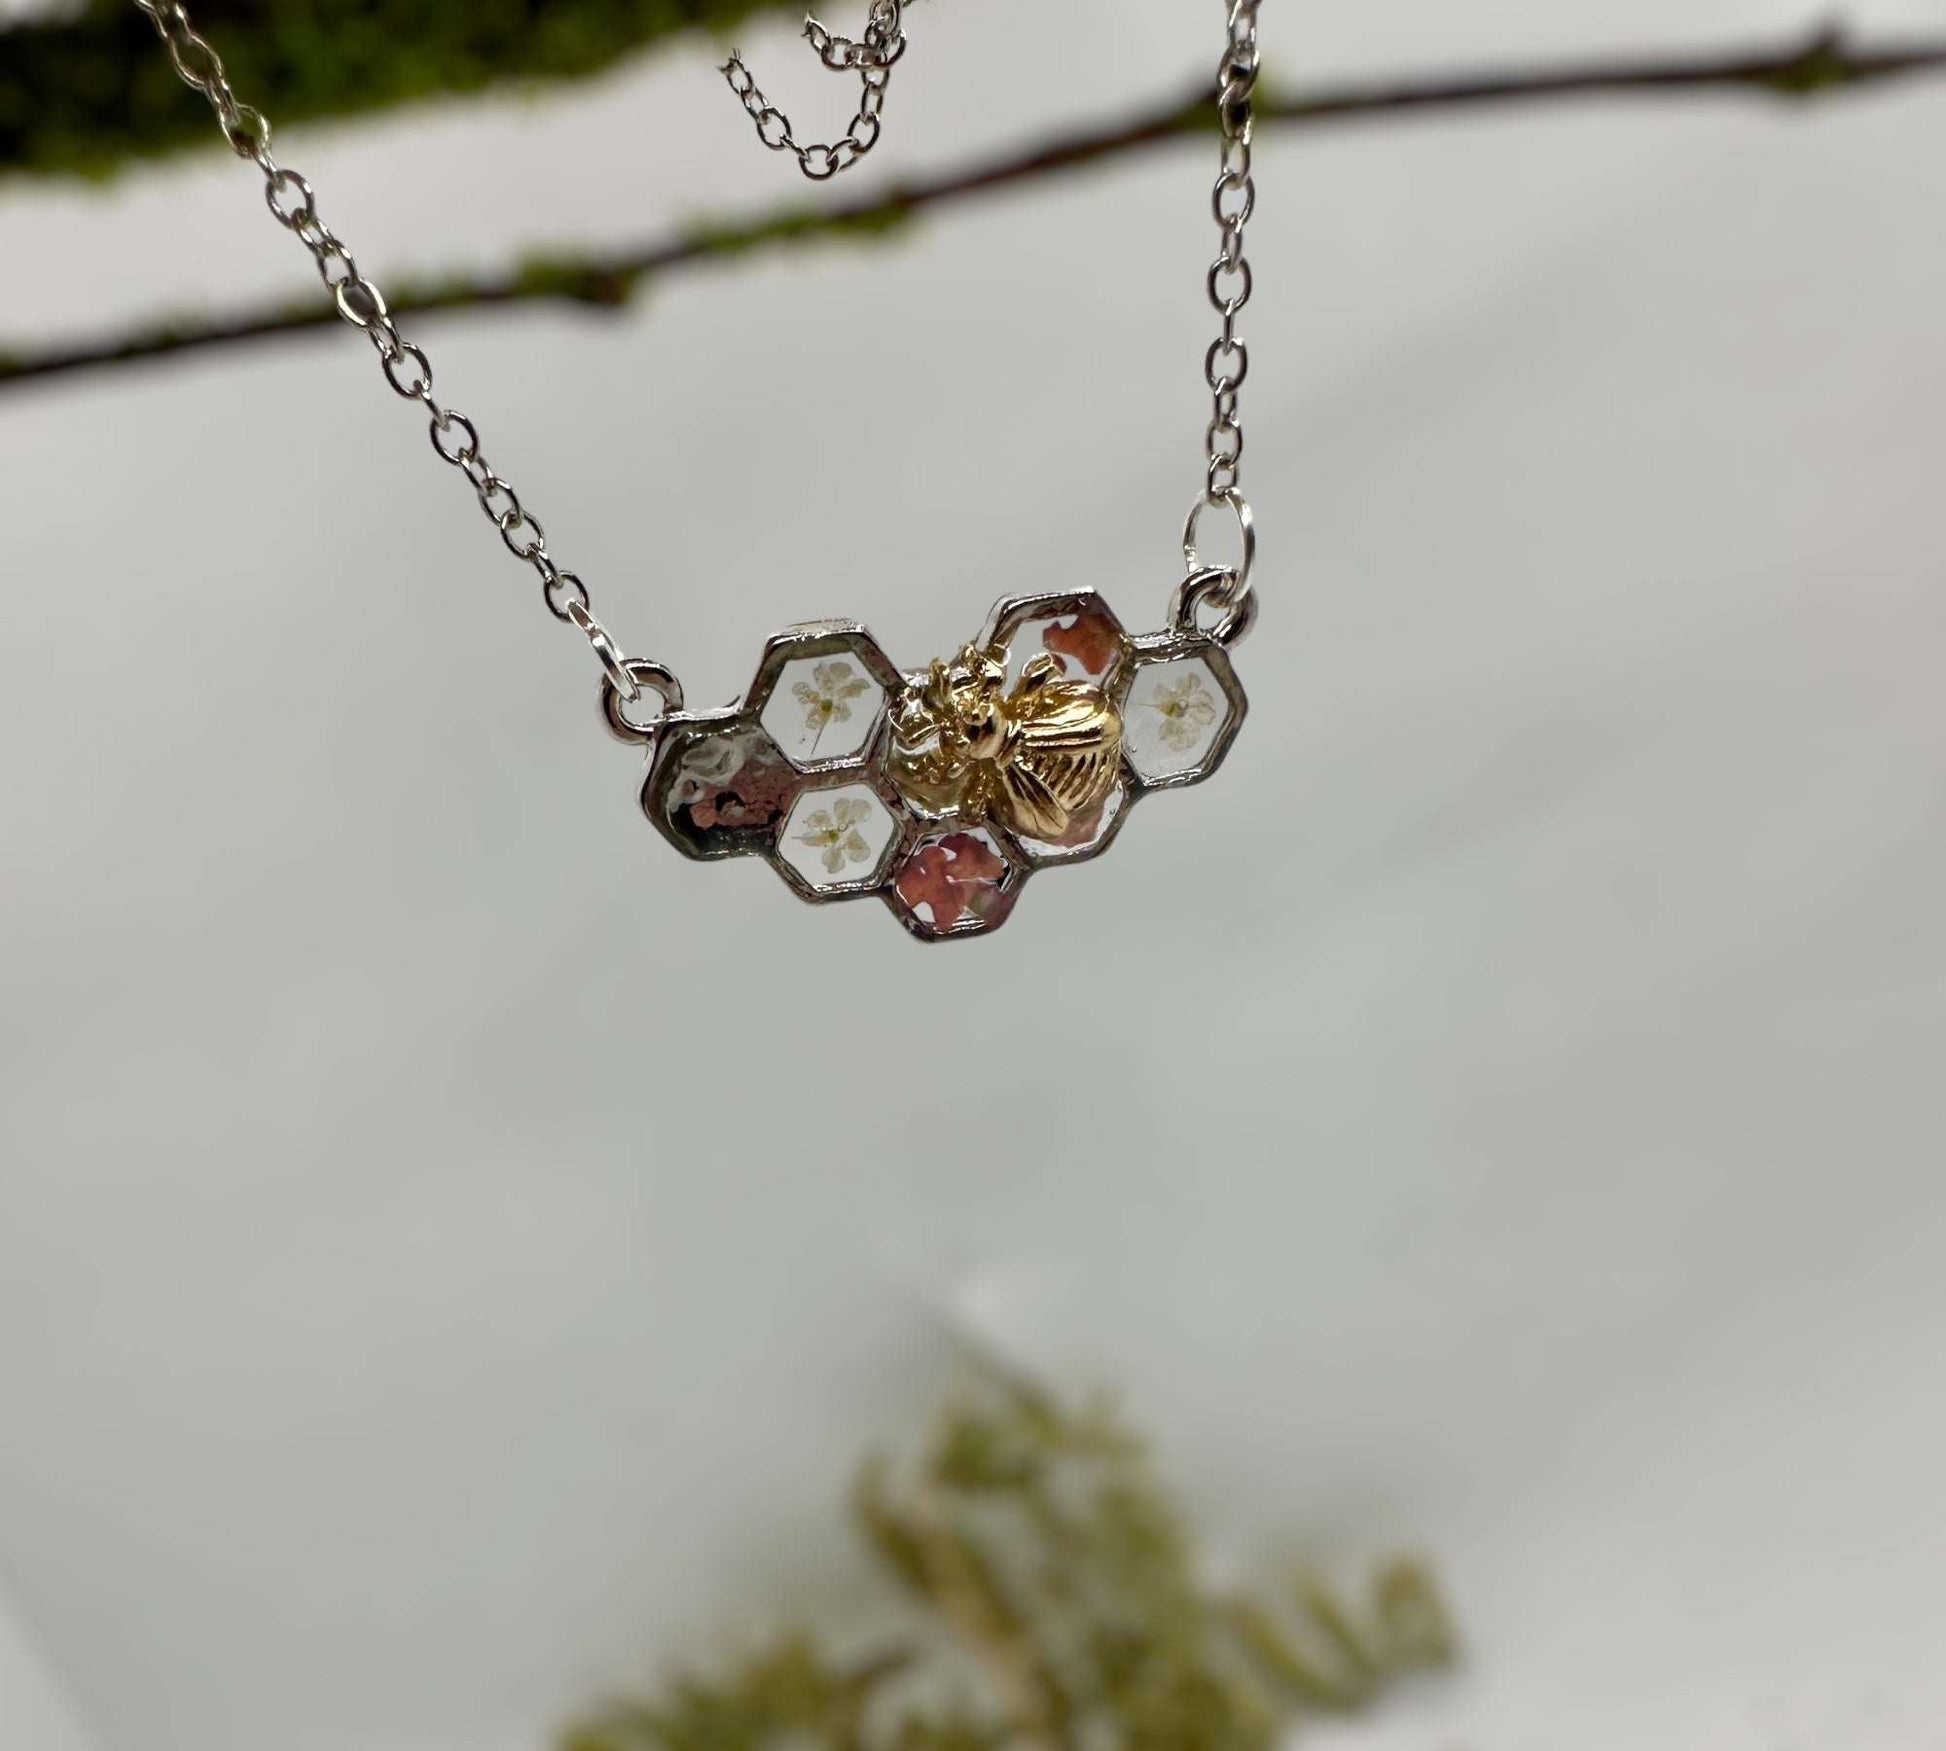 Bee Harmony Pendant - Handmade Pendant with Dried Flowers and Pearls